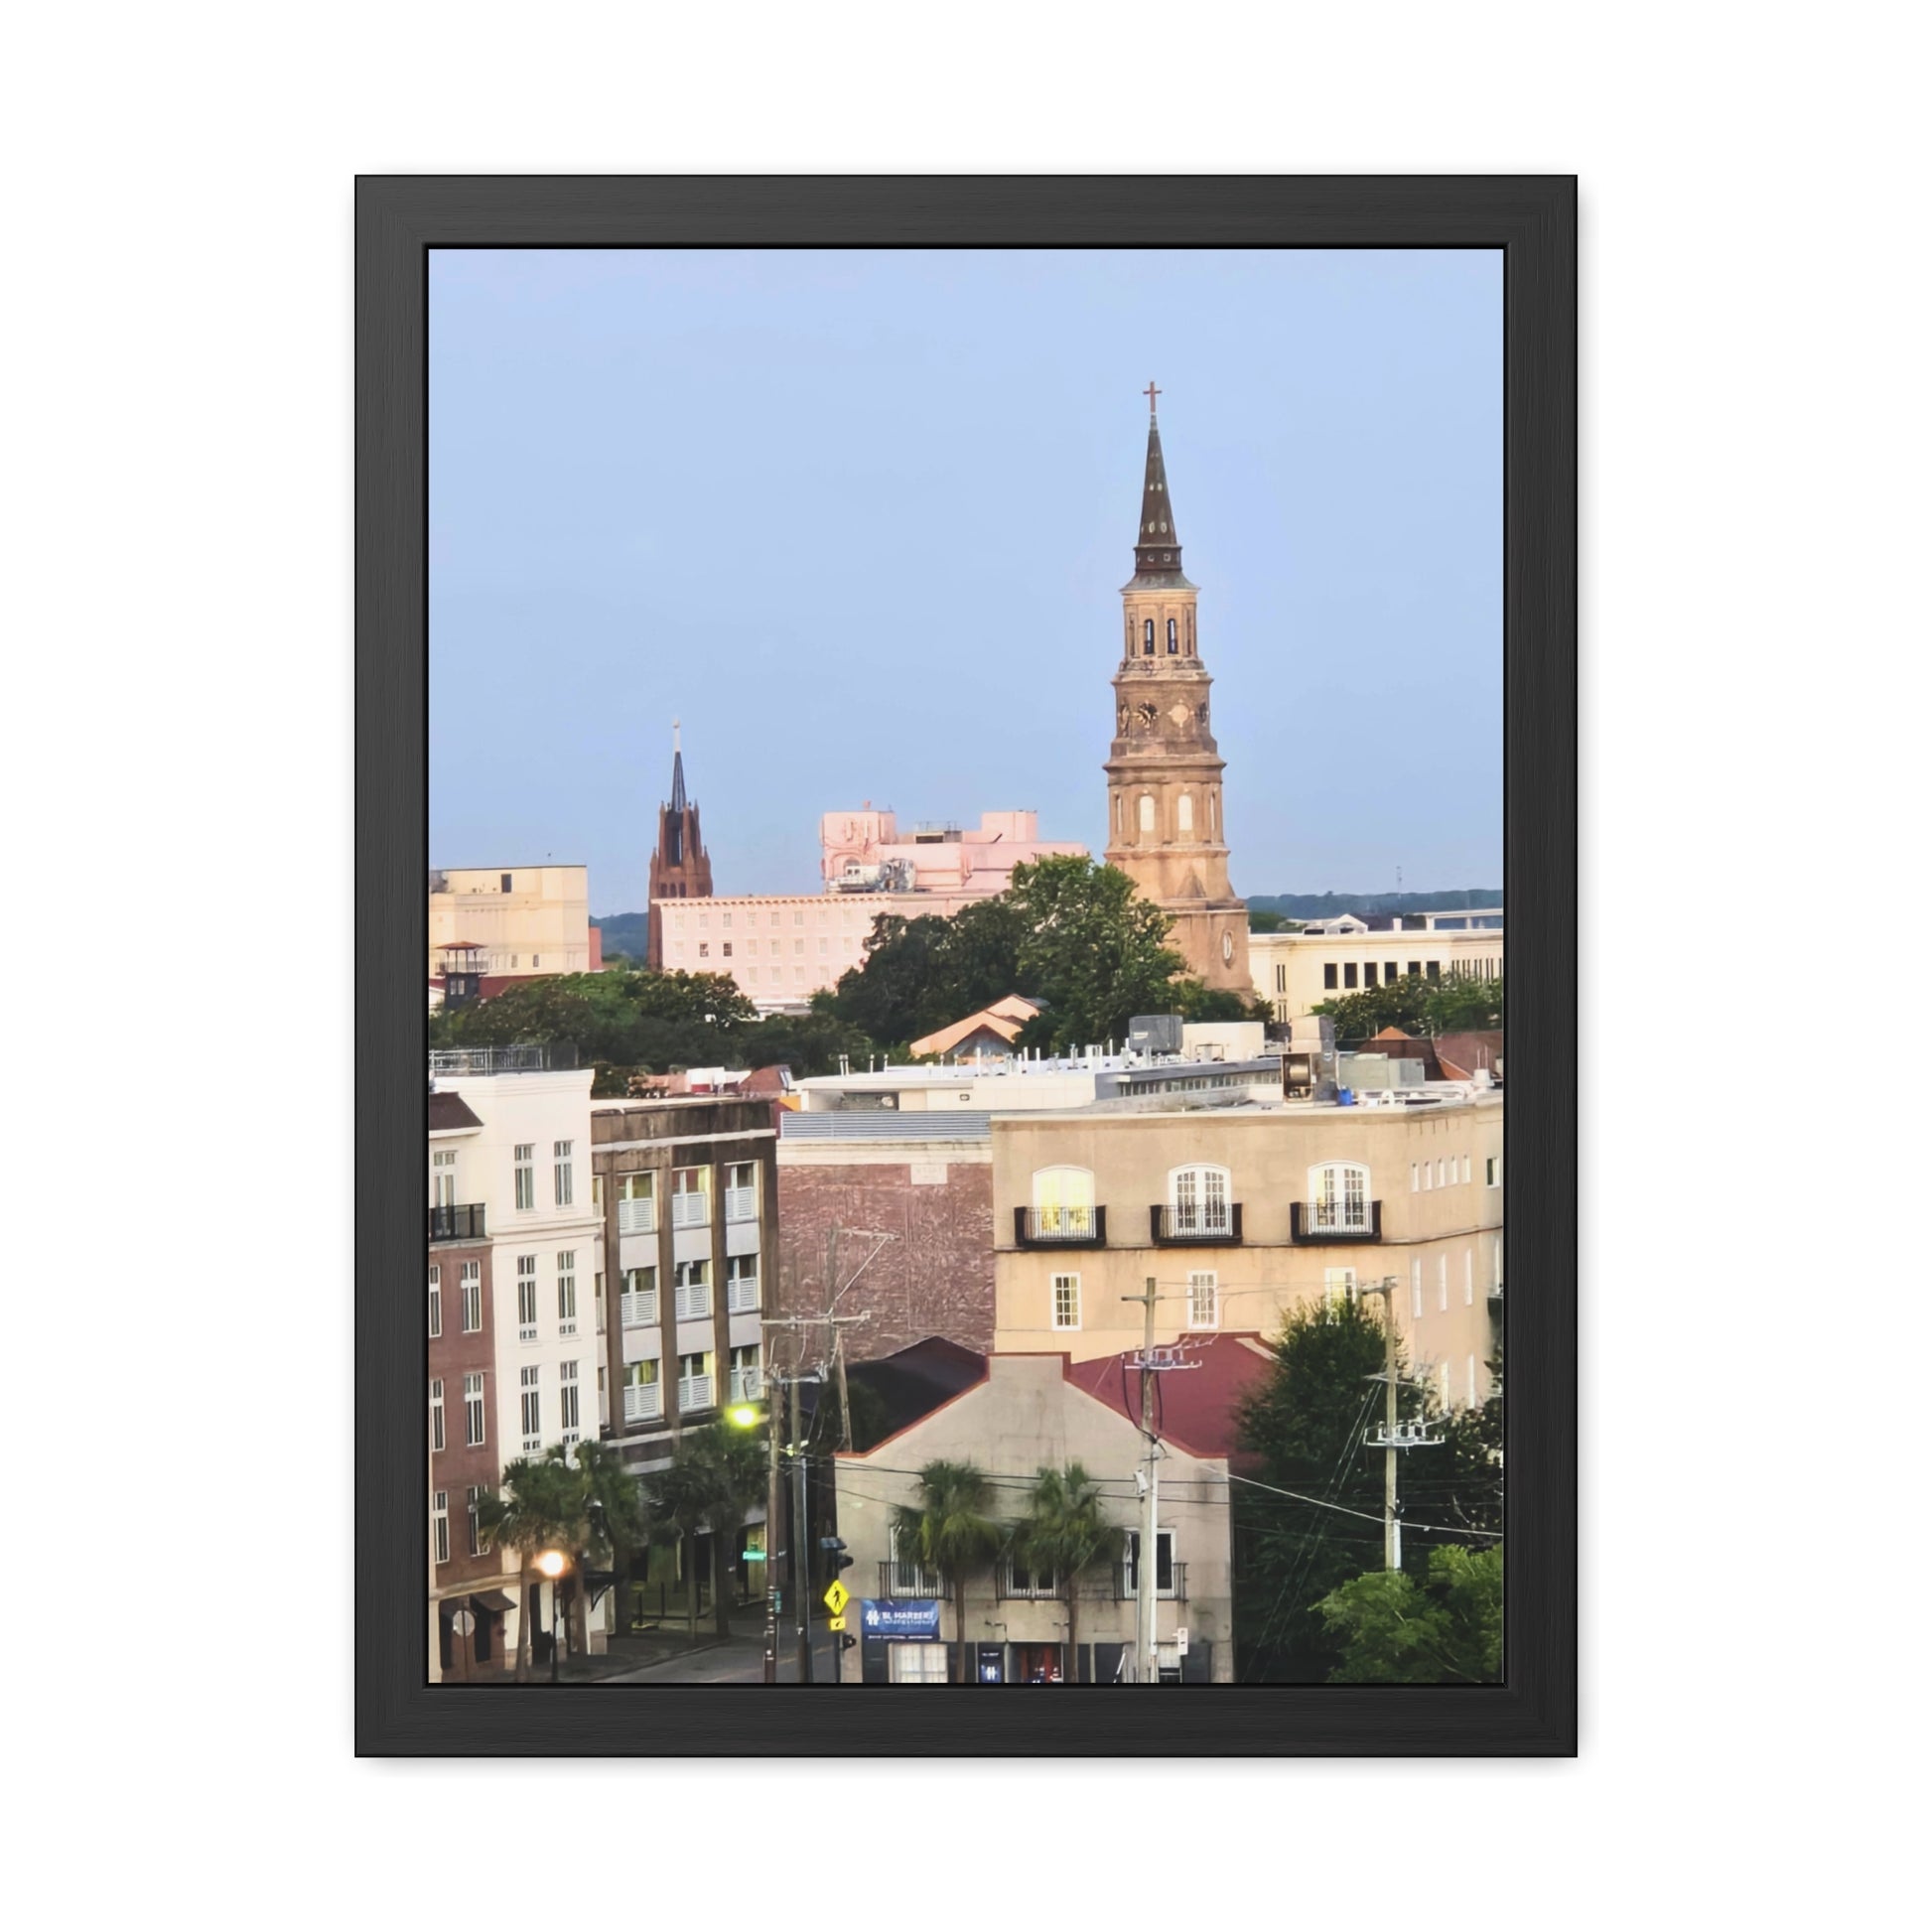 Wall art / poster of Charleston, SC with historical churches, front view.